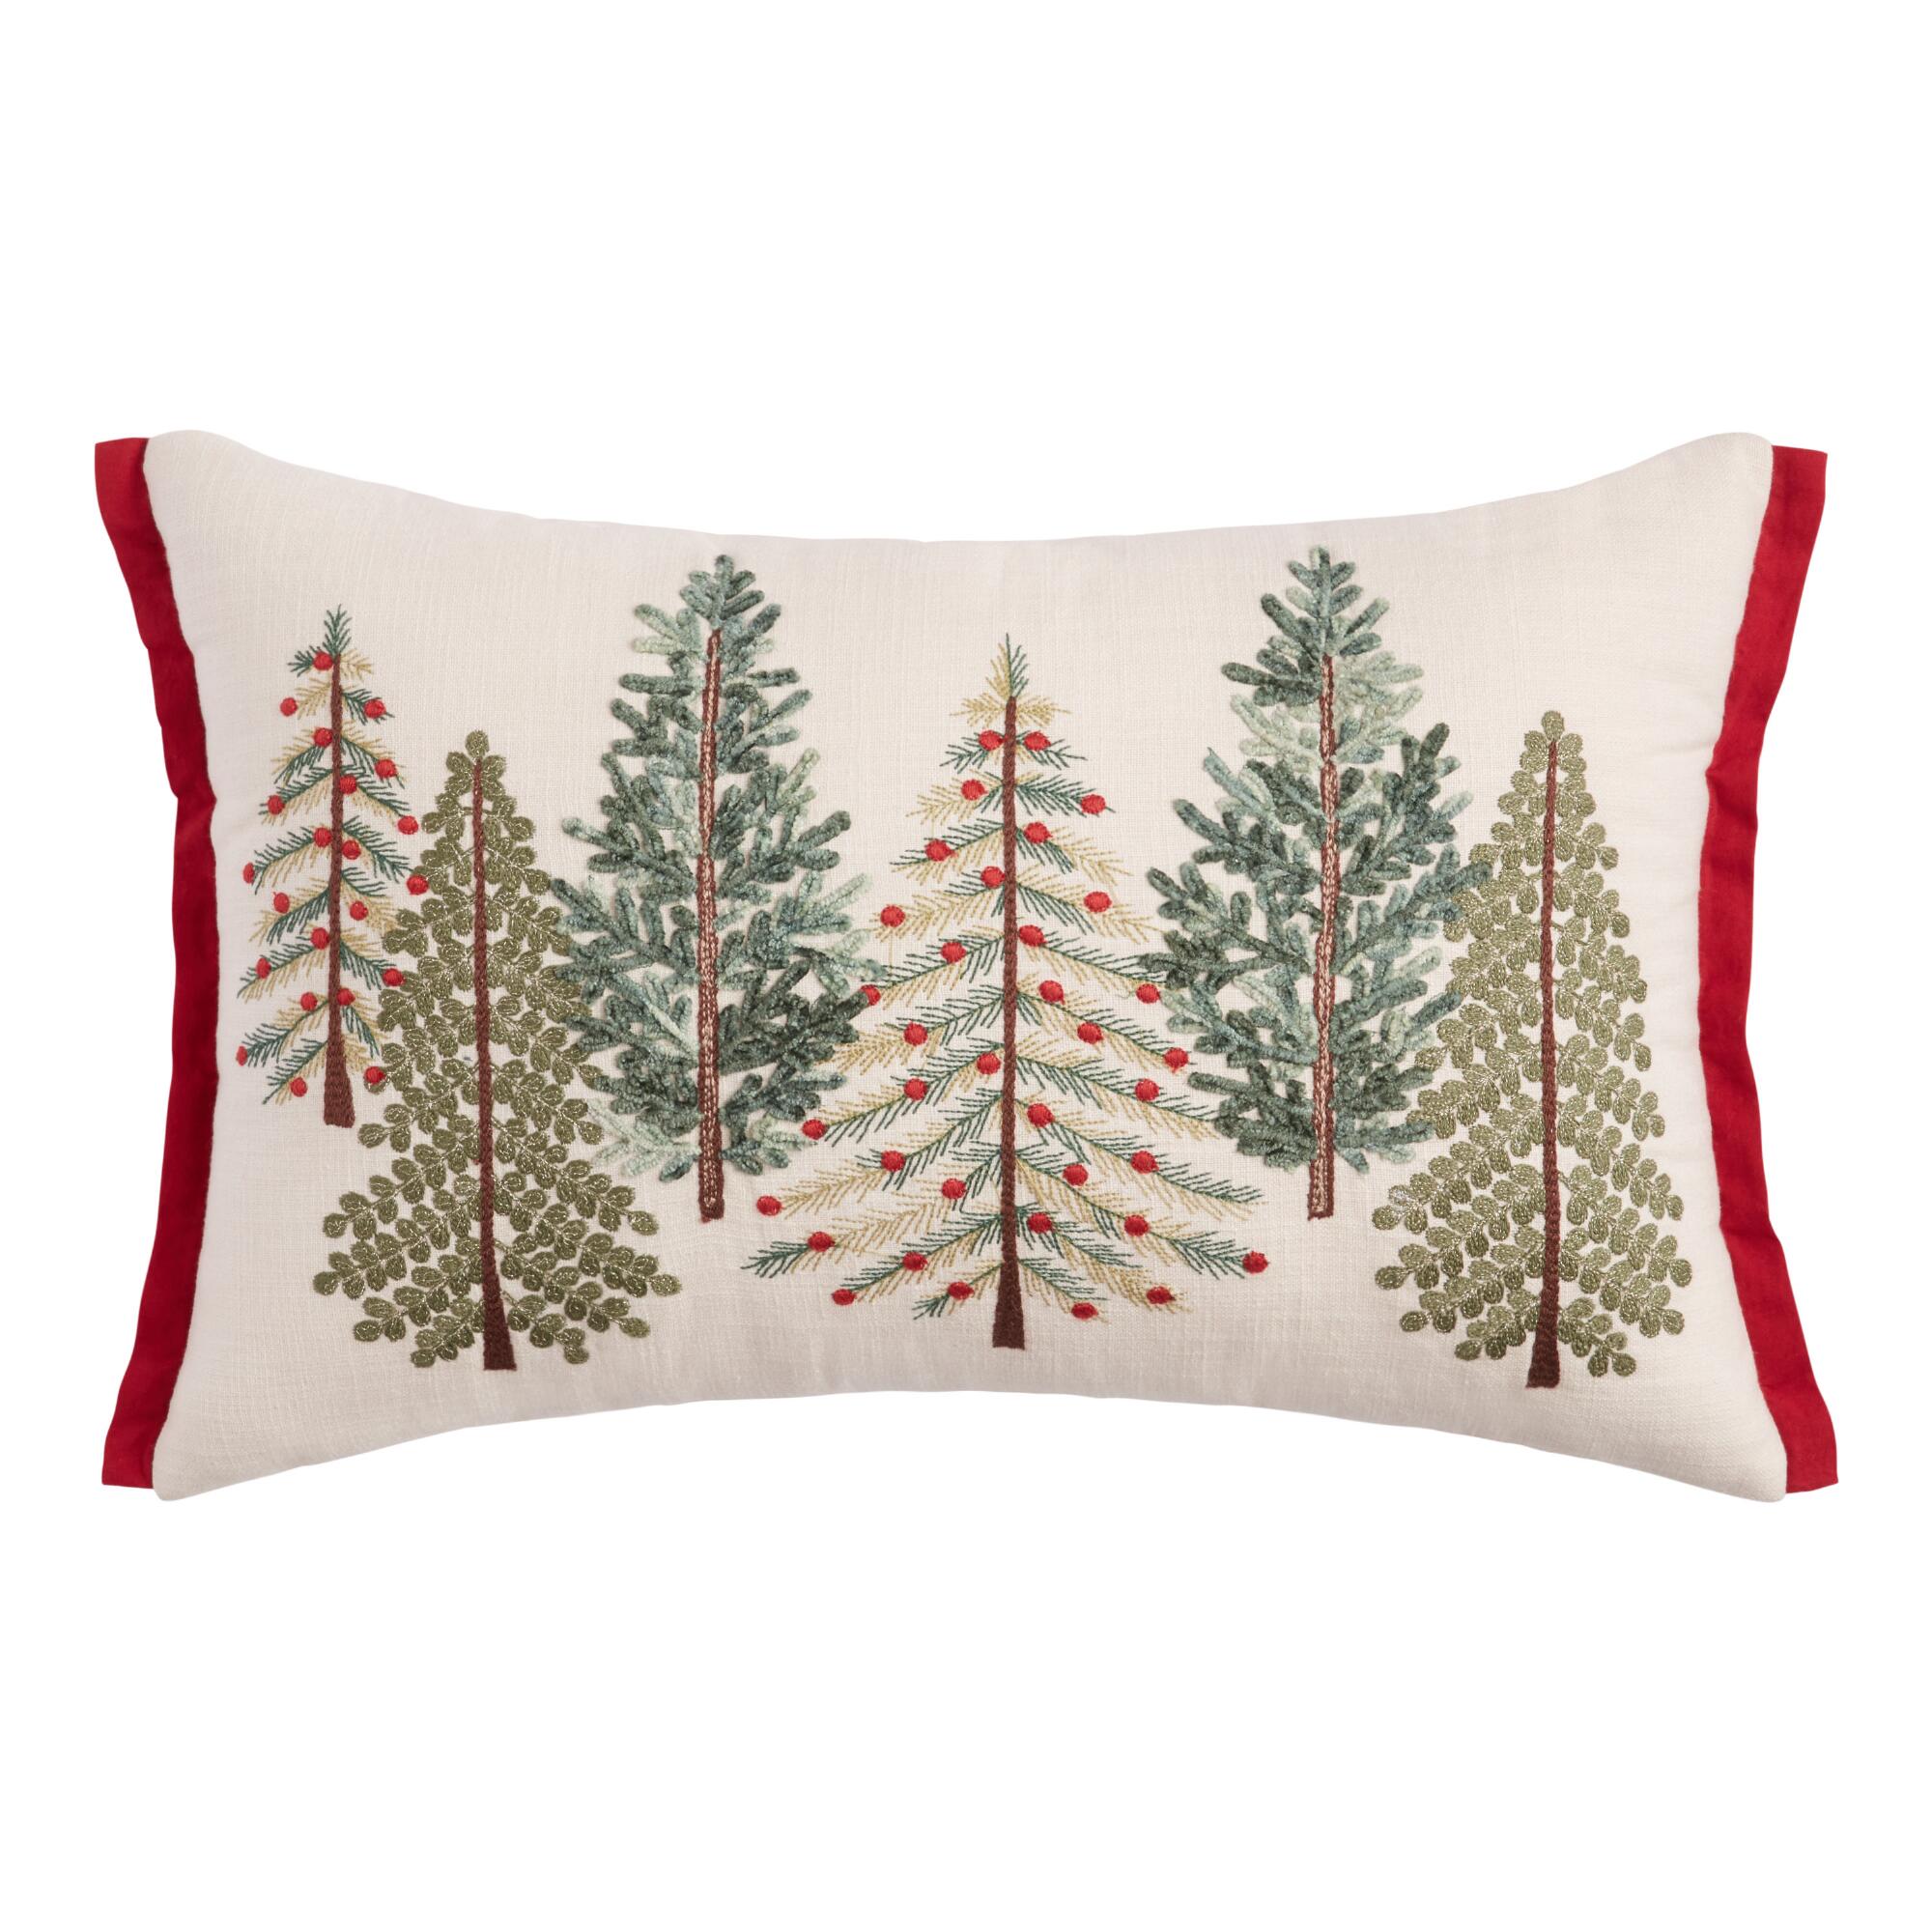 Pier Place Ivory, Red and Green Beaded Trees Lumbar Pillow: Green/Red - Cotton by World Market